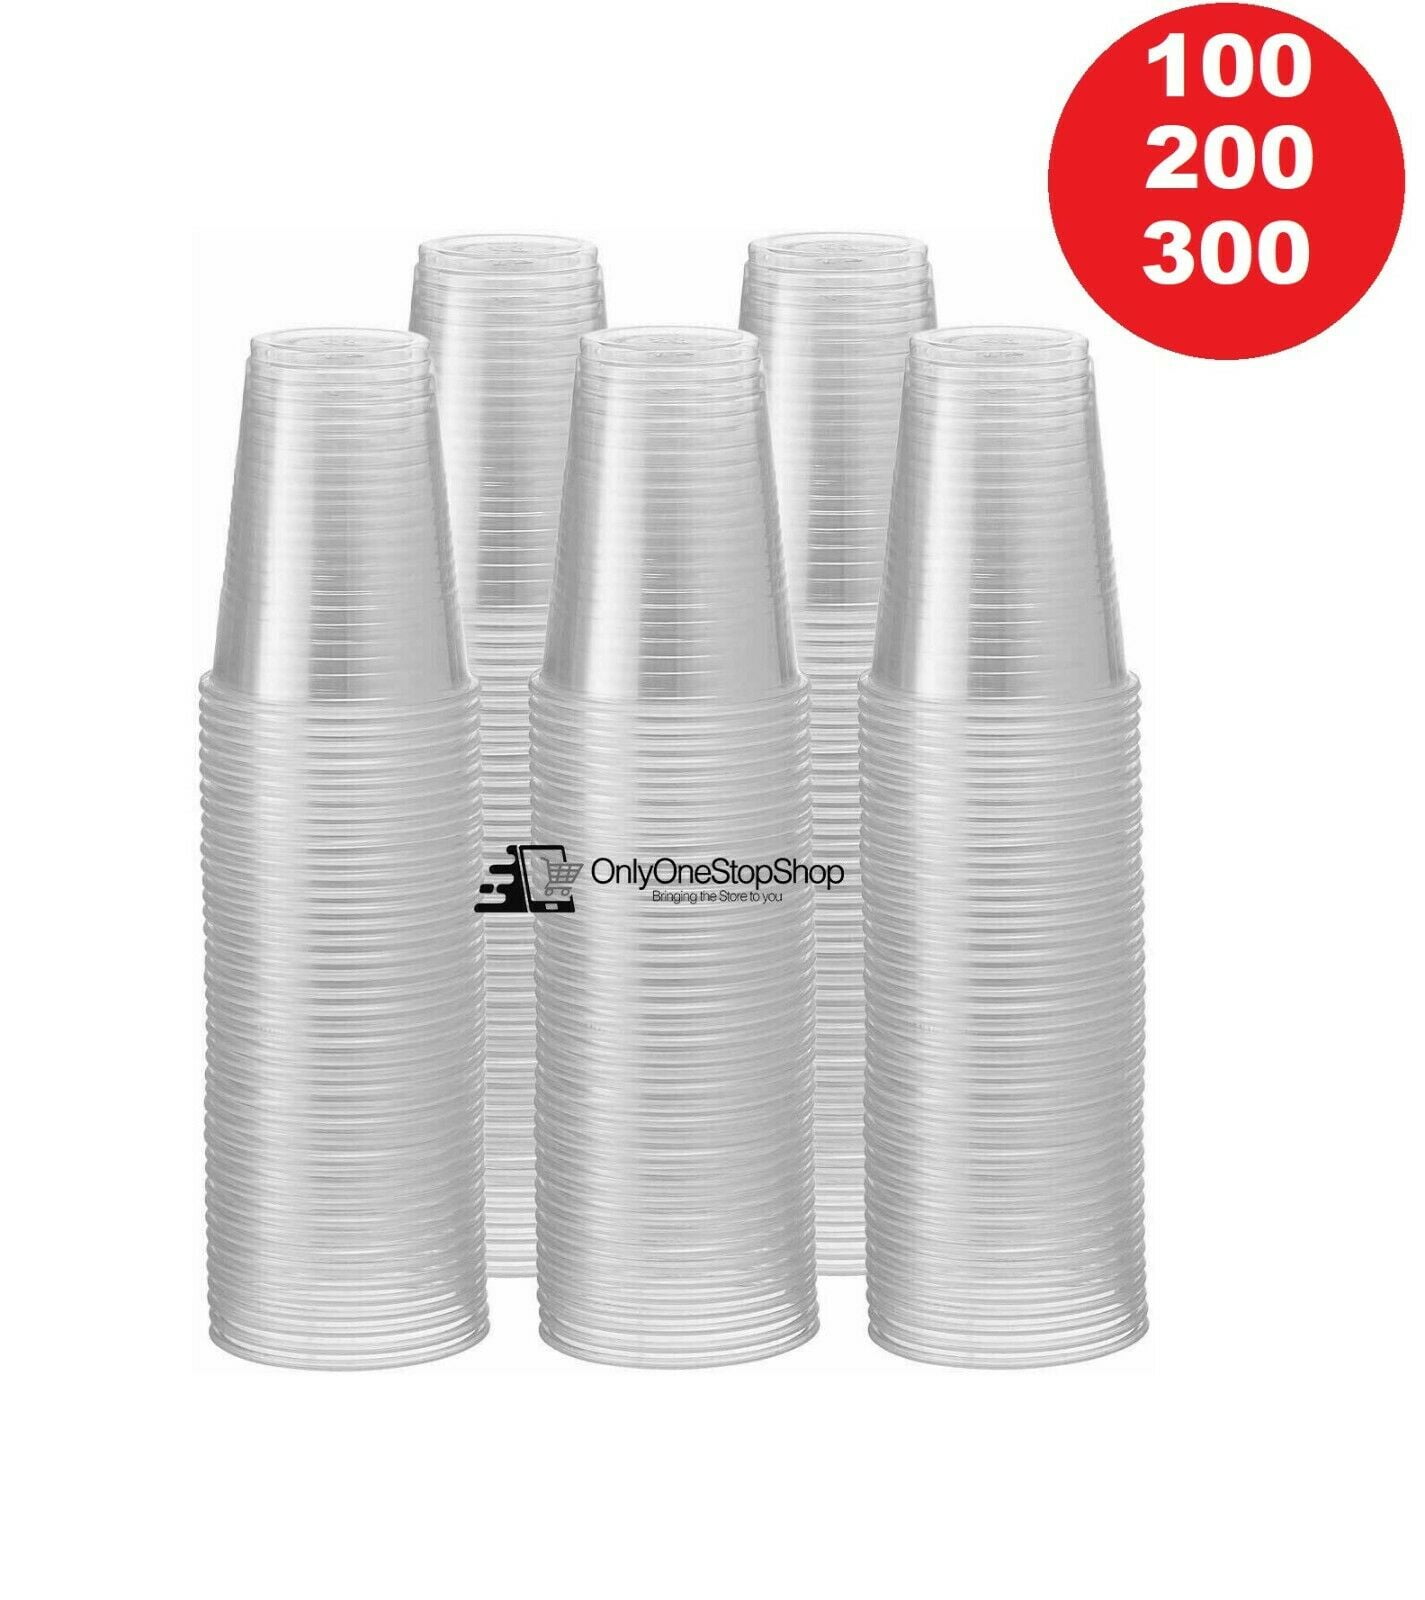 PLASTICPRO 7 oz Clear Plastic Disposable Drinking Cups [100 count]